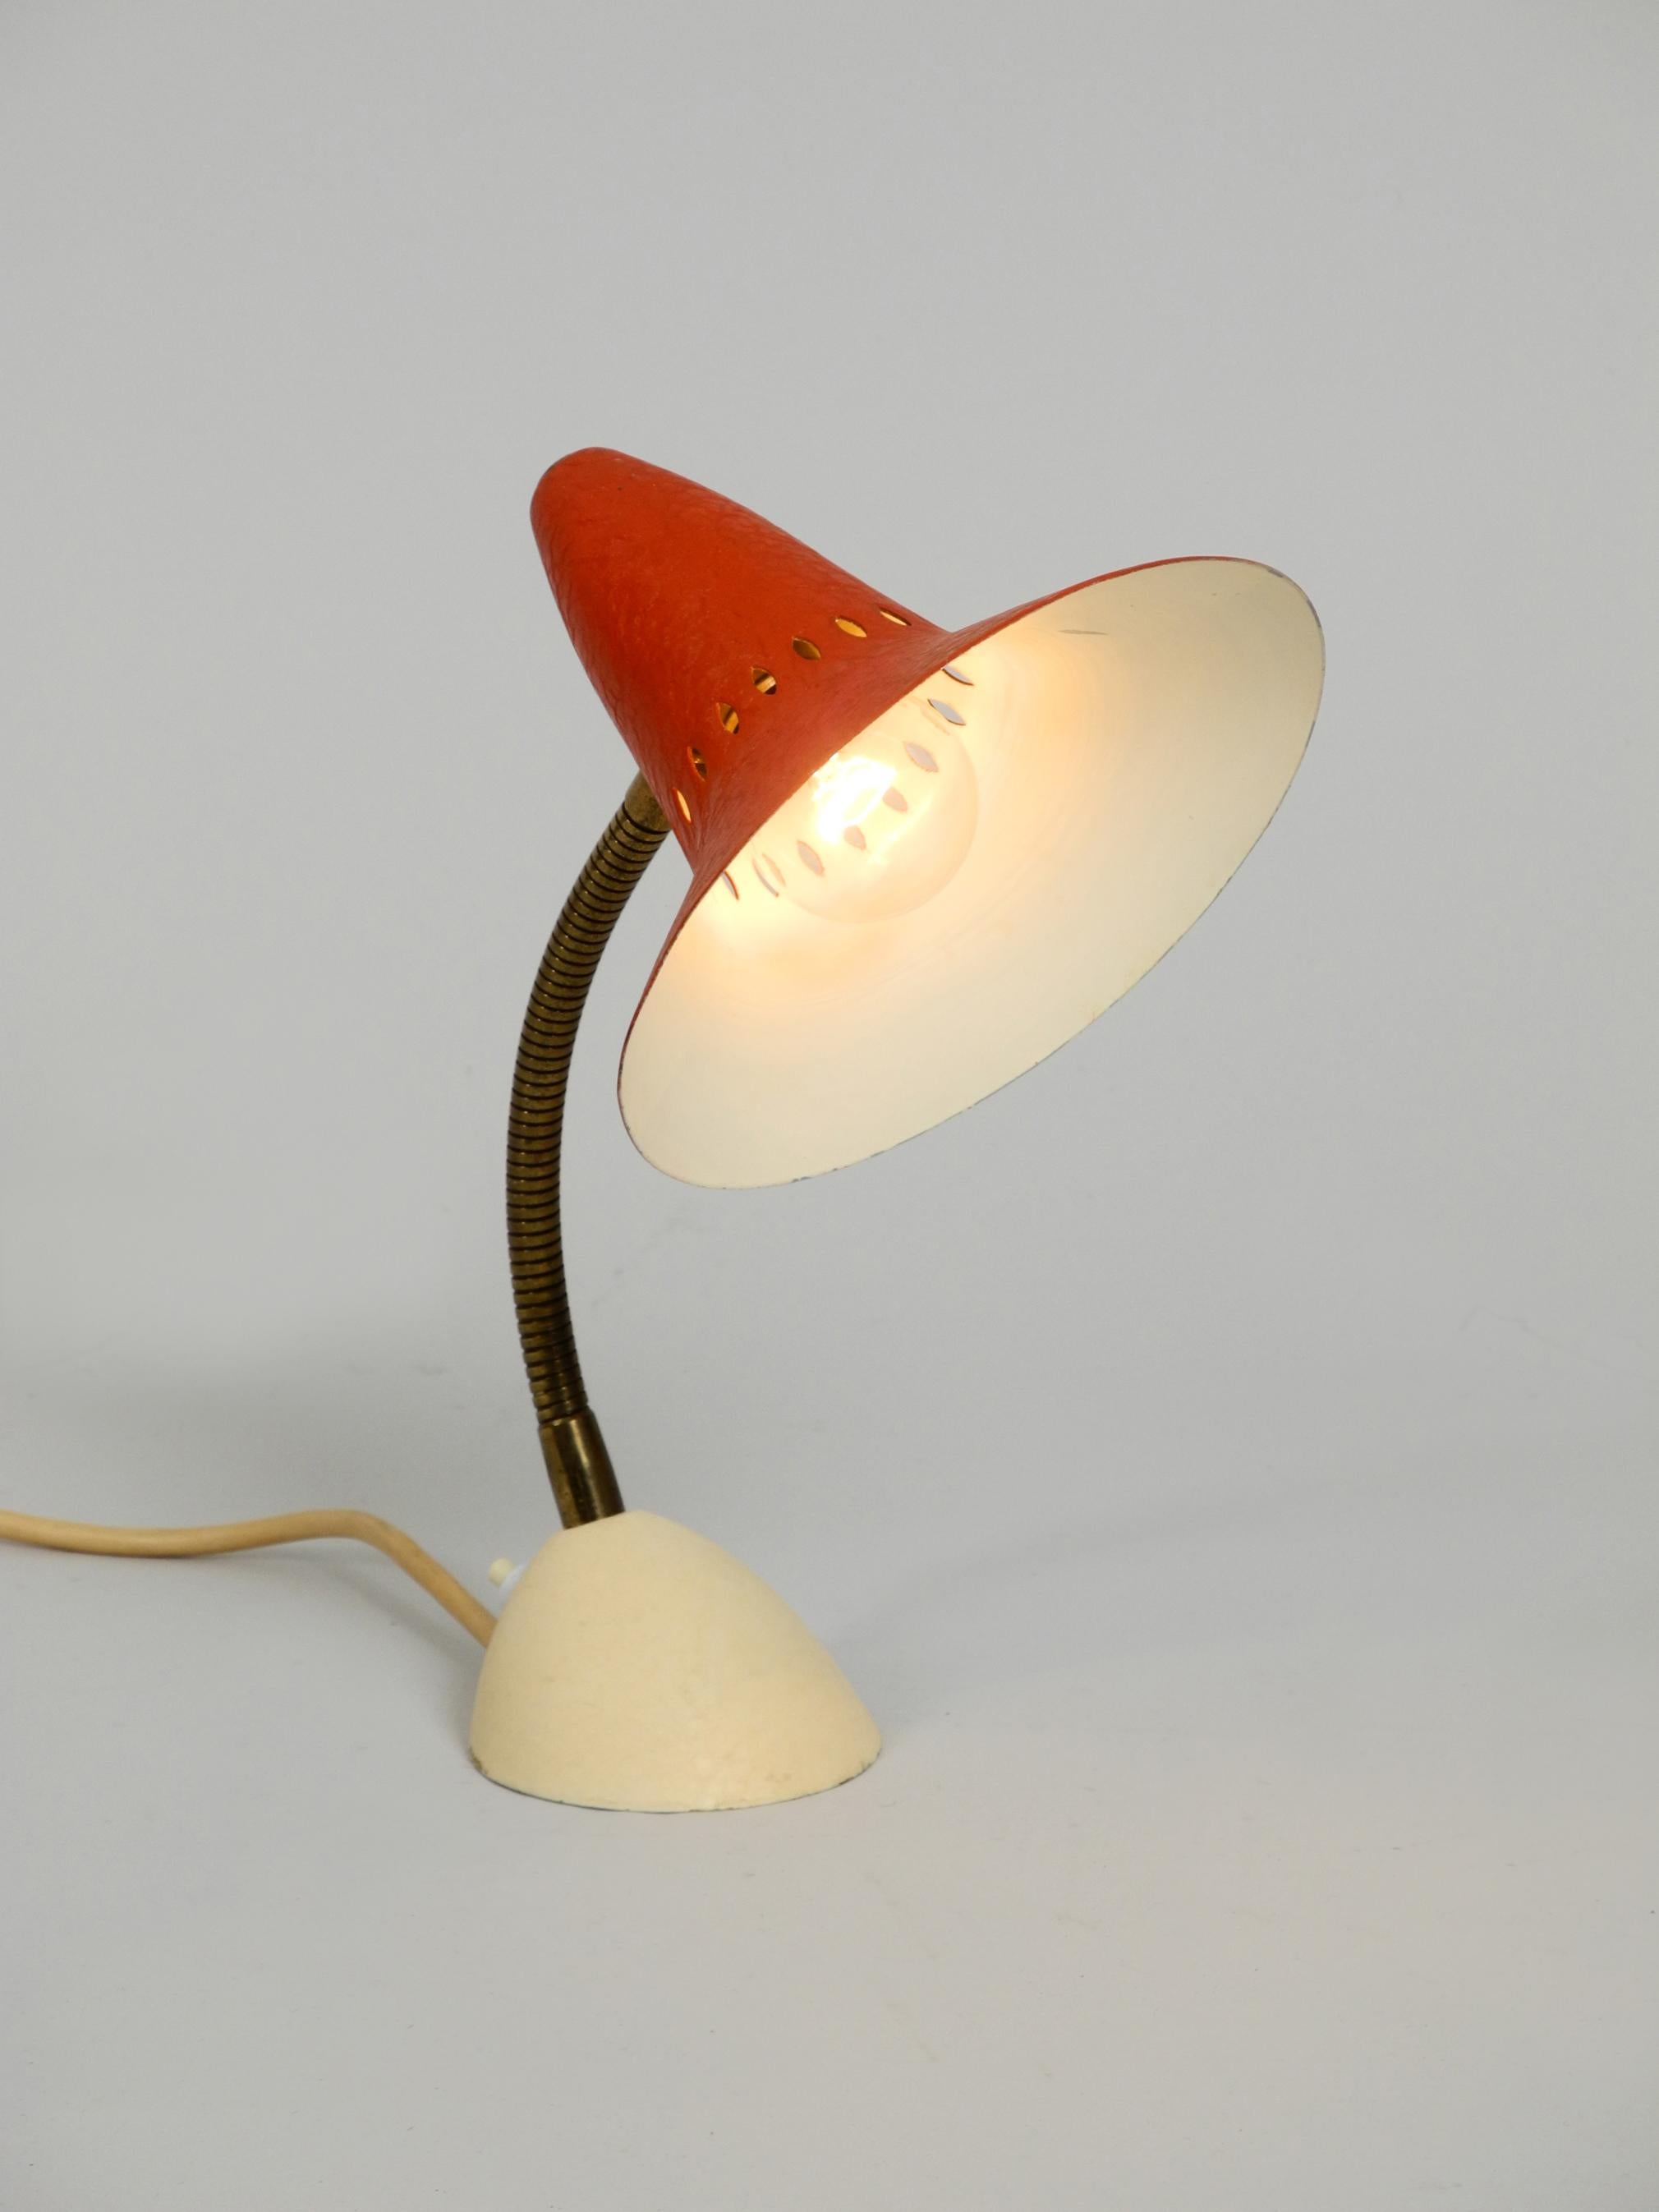 Classic very nice Mid-Century Modern table lamp.
Very nice typical minimalistic midcentury design with a fantastic patina.
Red lacquered aluminum shade with heavy metal base.
The neck is made of flexibly adjustable brass. Holds in every